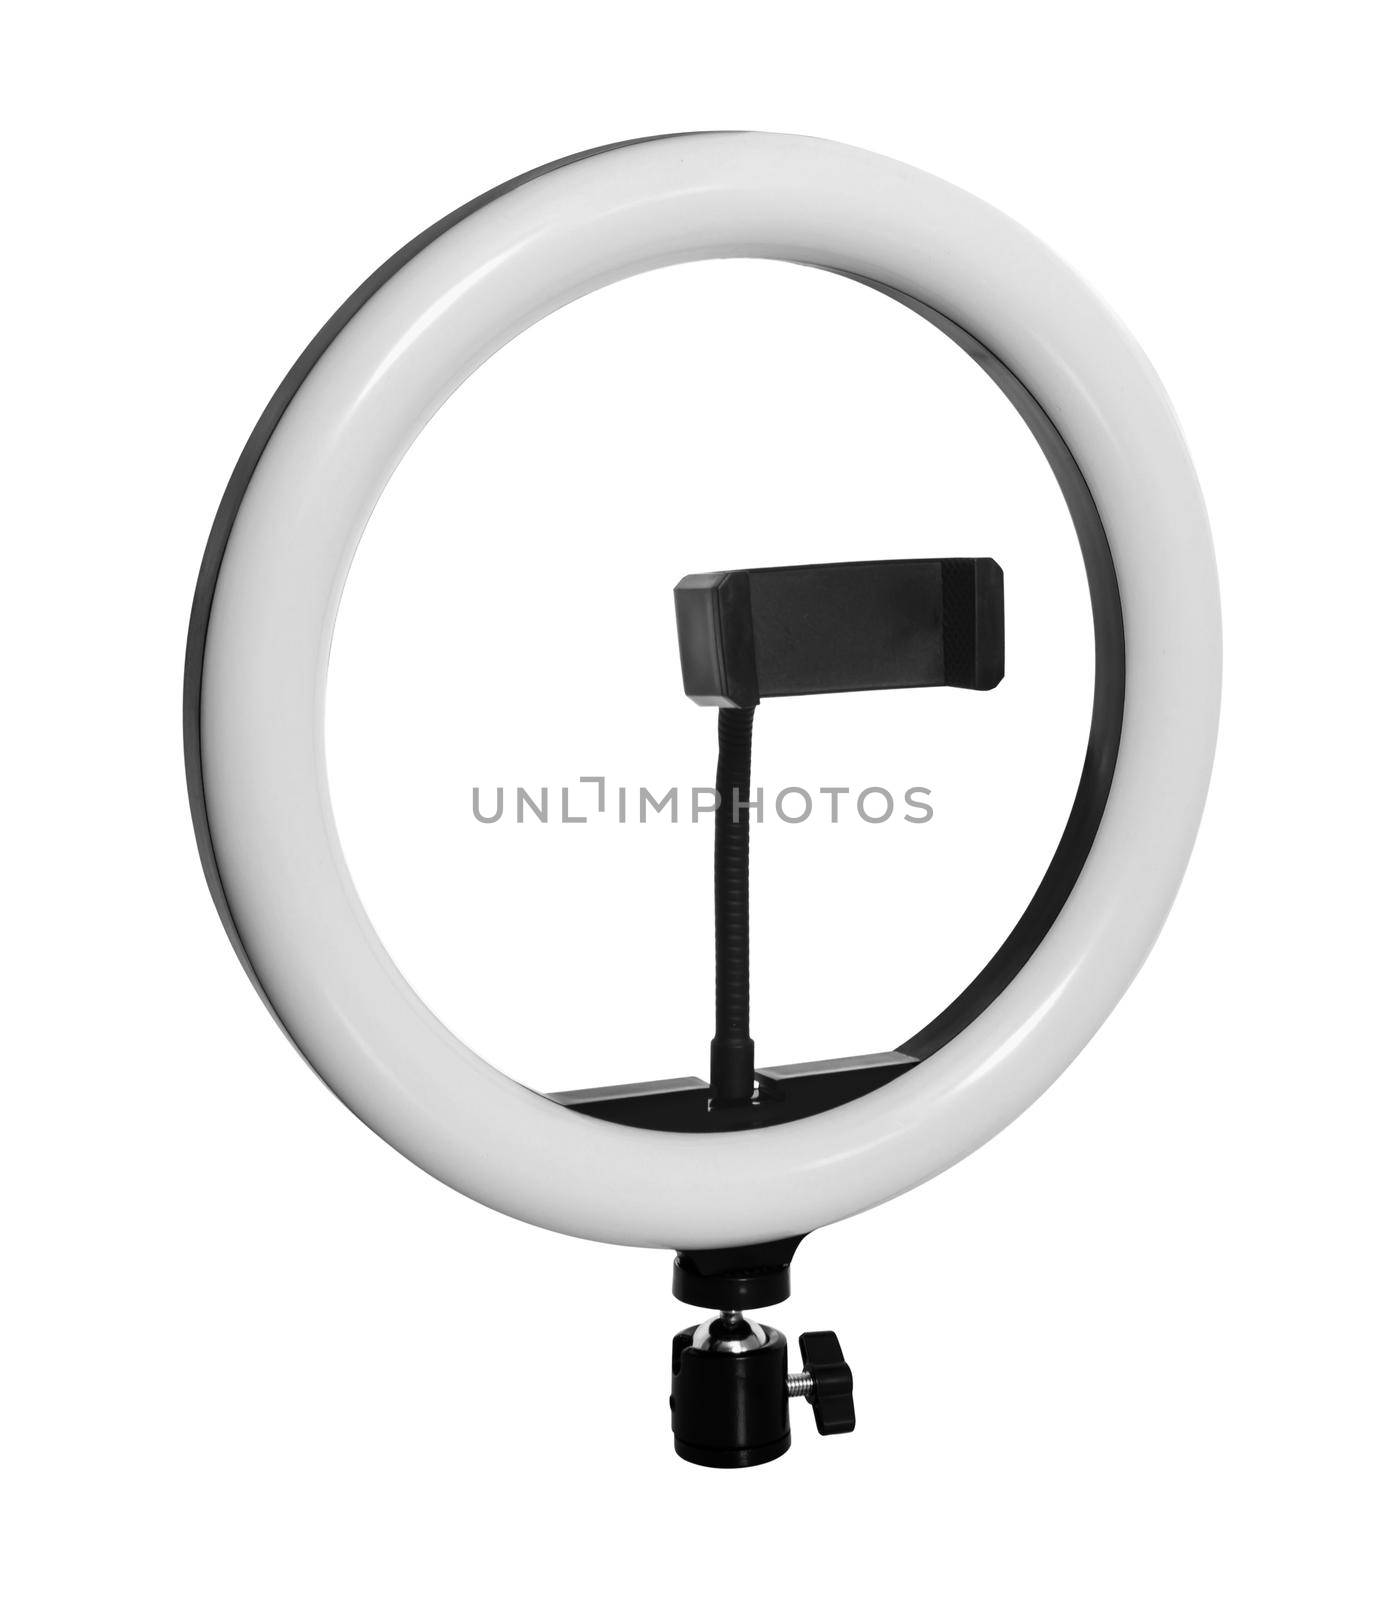 Selfie lamp with phone mount, isolated on white background by A_A